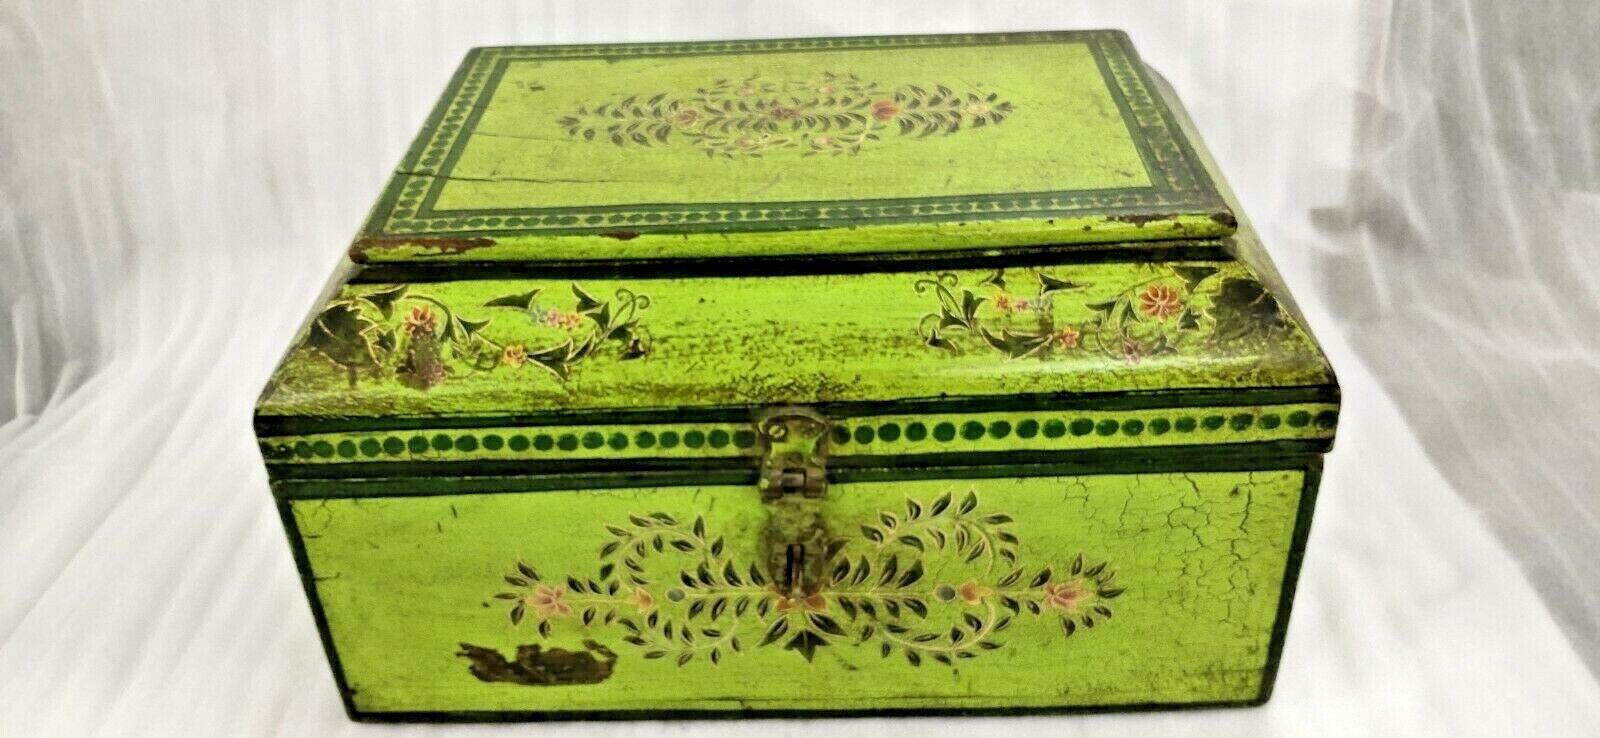 VINTAGE UNIQUE HANDMADE WOODEN HAND PAINTED BIG JEWELRY BOX